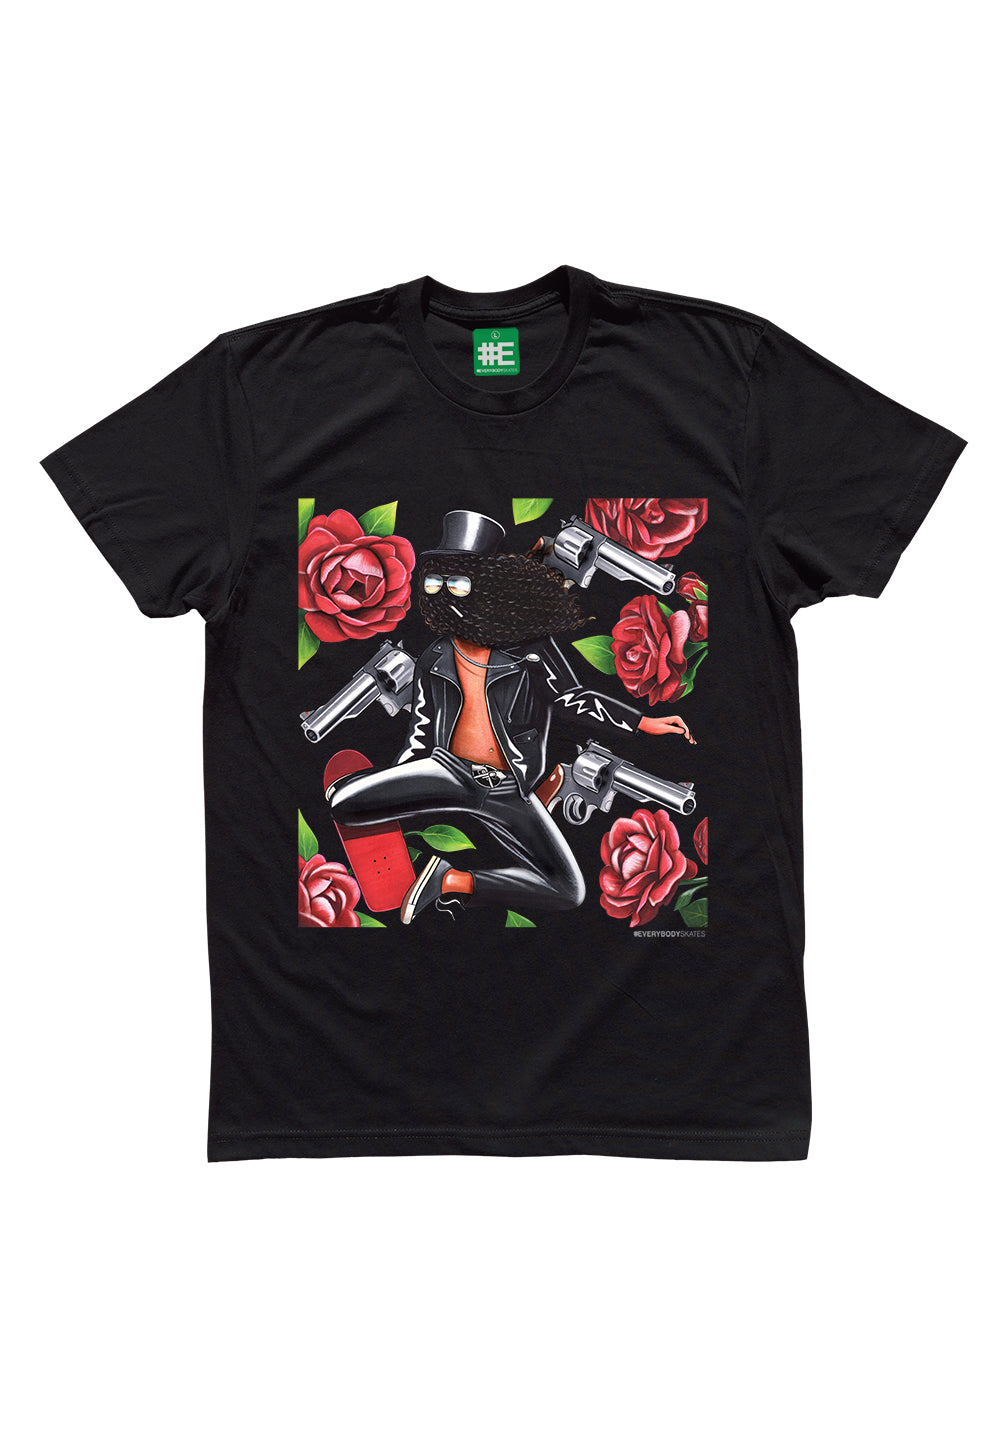 Gats and Flowers Graphic T-shirt